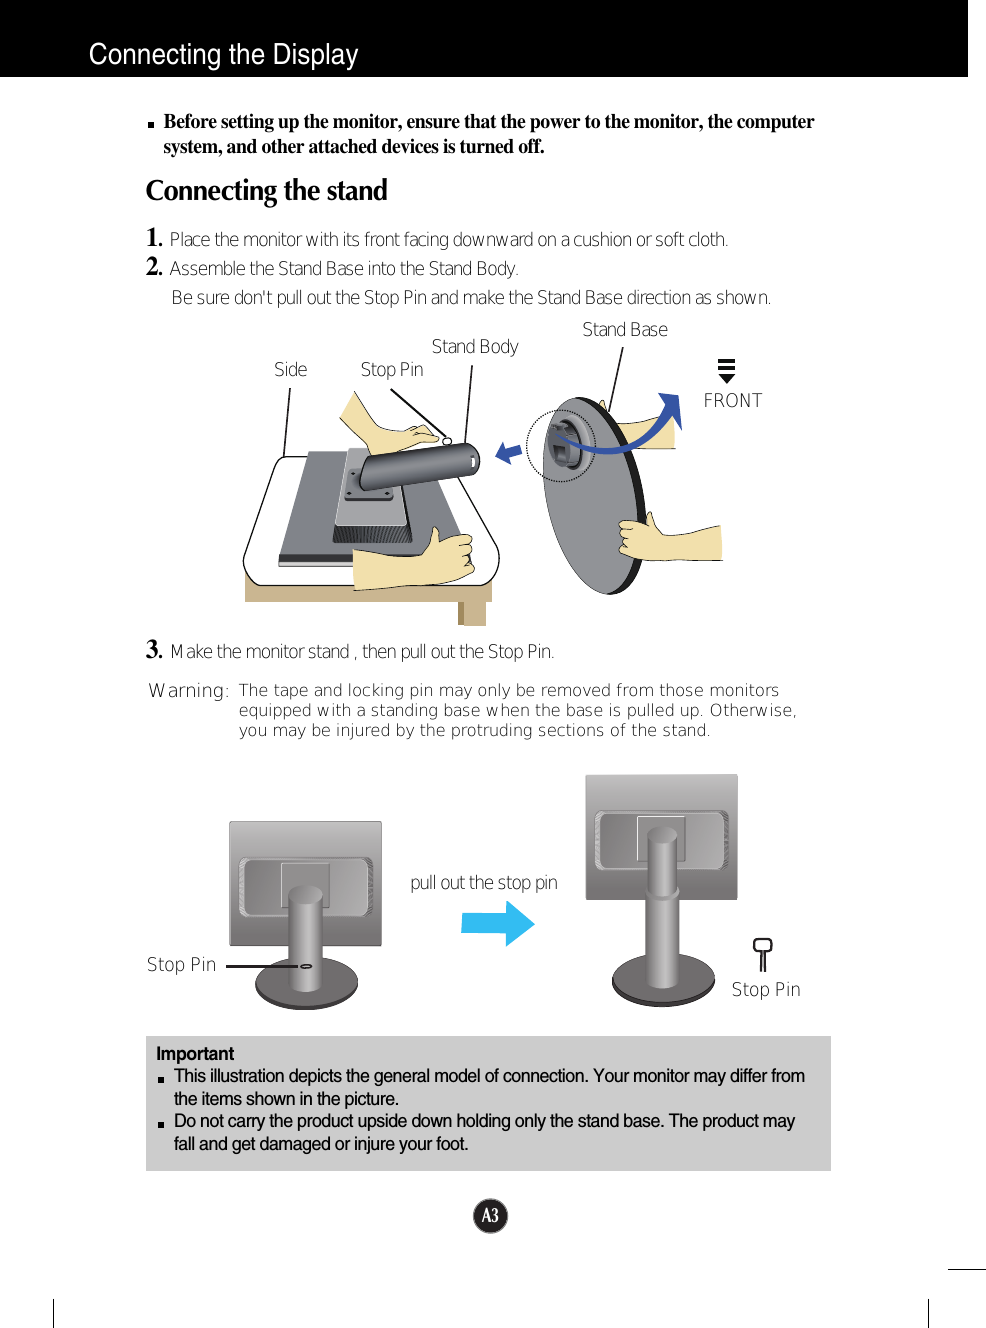 A3Connecting the DisplayImportantThis illustration depicts the general model of connection. Your monitor may differ fromthe items shown in the picture.Do not carry the product upside down holding only the stand base. The product mayfall and get damaged or injure your foot.Before setting up the monitor, ensure that the power to the monitor, the computersystem, and other attached devices is turned off.Connecting the stand 1.  Place the monitor with its front facing downward on a cushion or soft cloth.2.Assemble the Stand Base into the Stand Body.Be sure don&apos;t pull out the Stop Pin and make the Stand Base direction as shown. 3.Make the monitor stand , then pull out the Stop Pin.Stand BaseFRONTStand BodyStop PinSideStop Pin Stop Pinpull out the stop pinThe tape and locking pin may only be removed from those monitorsequipped with a standing base when the base is pulled up. Otherwise,you may be injured by the protruding sections of the stand.Warning: